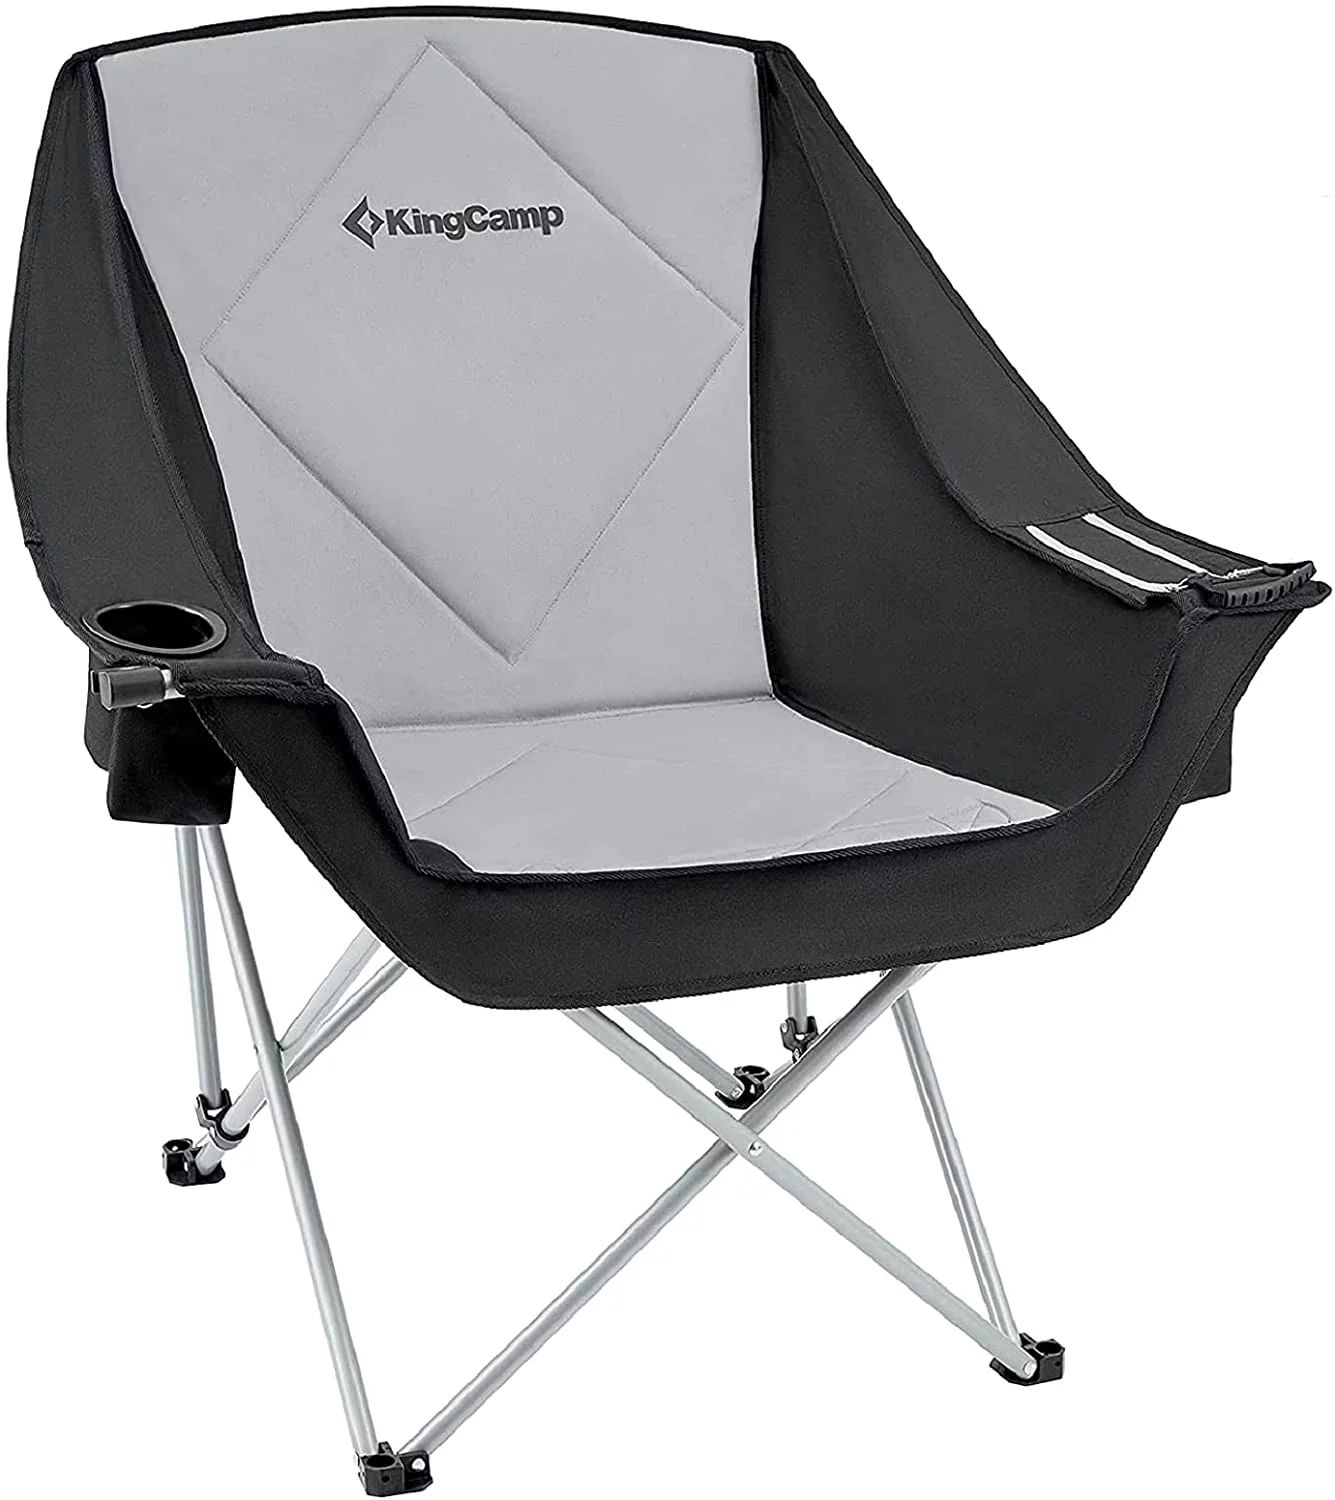 KingCamp Oversized Folding Camping Chair Portable Saucer Round Chairs Outdoor Padded Sofa Chair f... | Walmart (US)